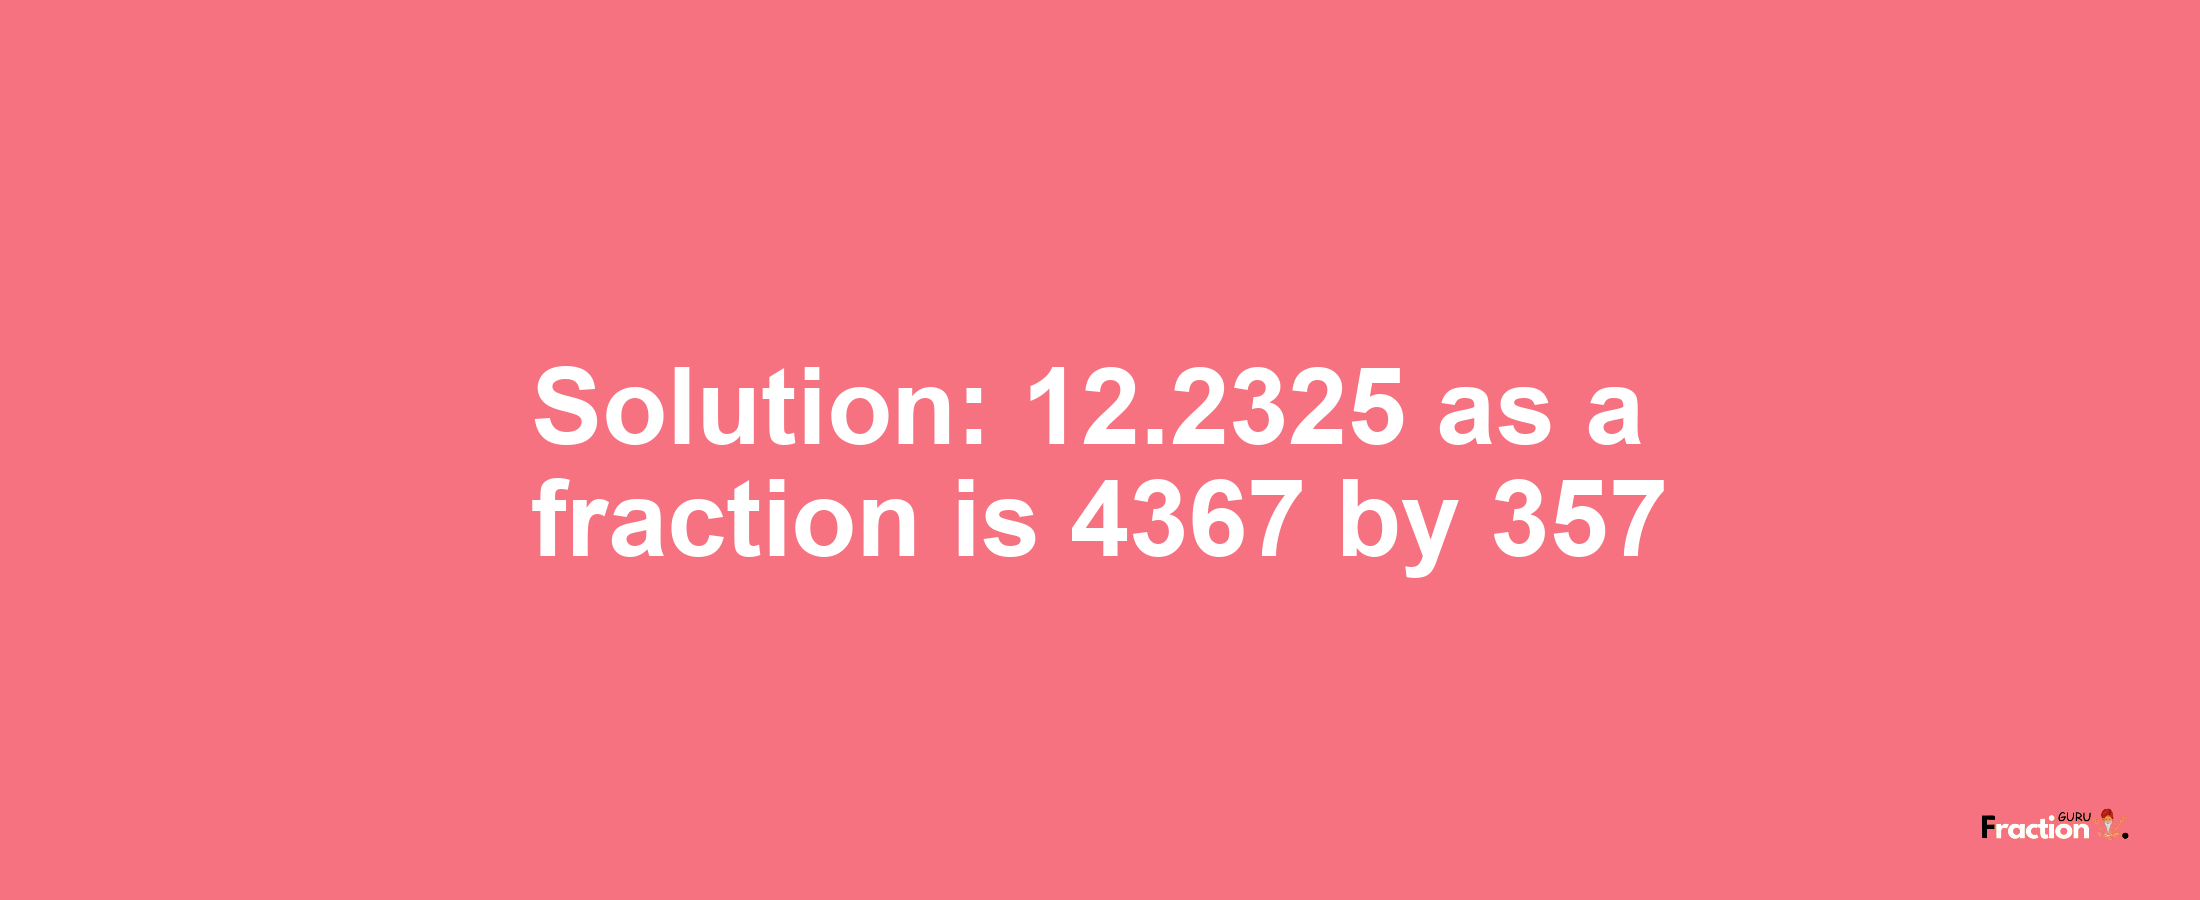 Solution:12.2325 as a fraction is 4367/357